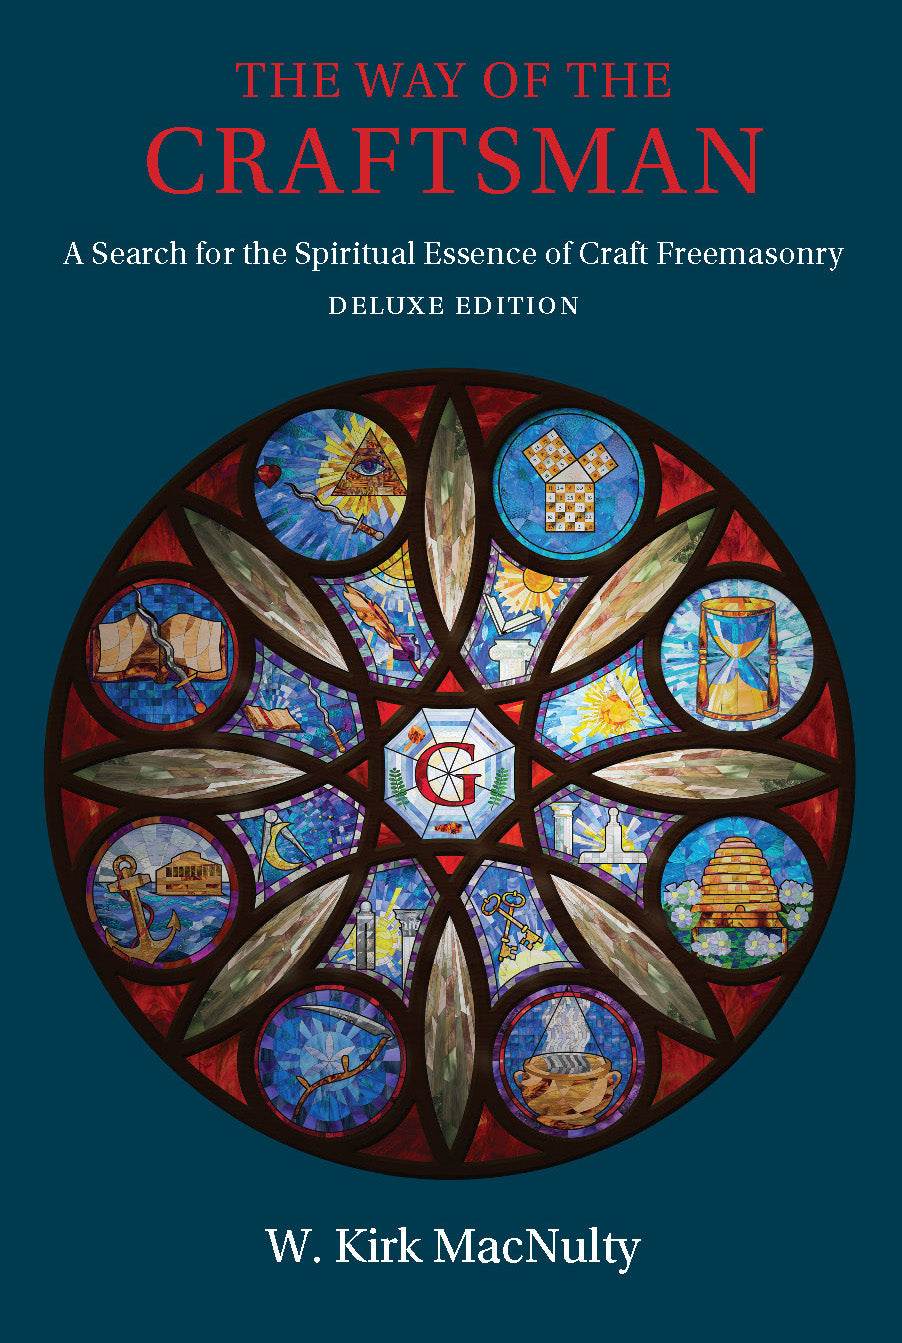 The Way of the Craftsman: Deluxe Edition: A Search for the Spiritual Essence of Craft Freemasonry